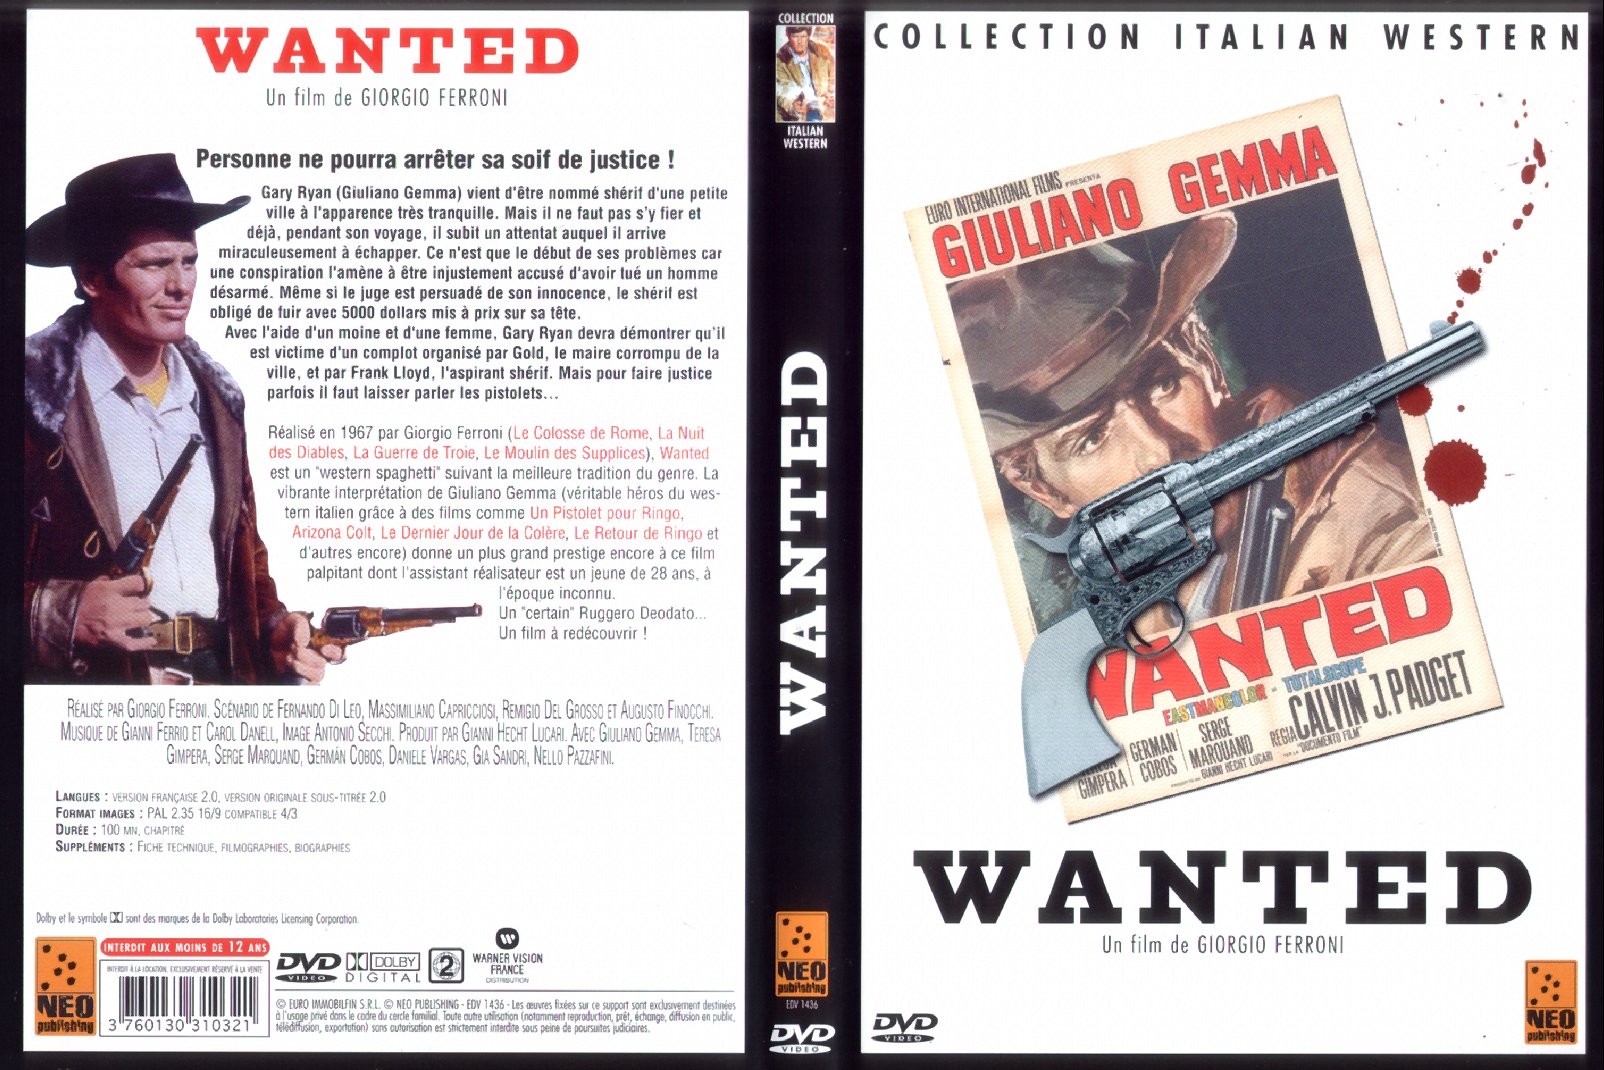 Jaquette DVD Wanted